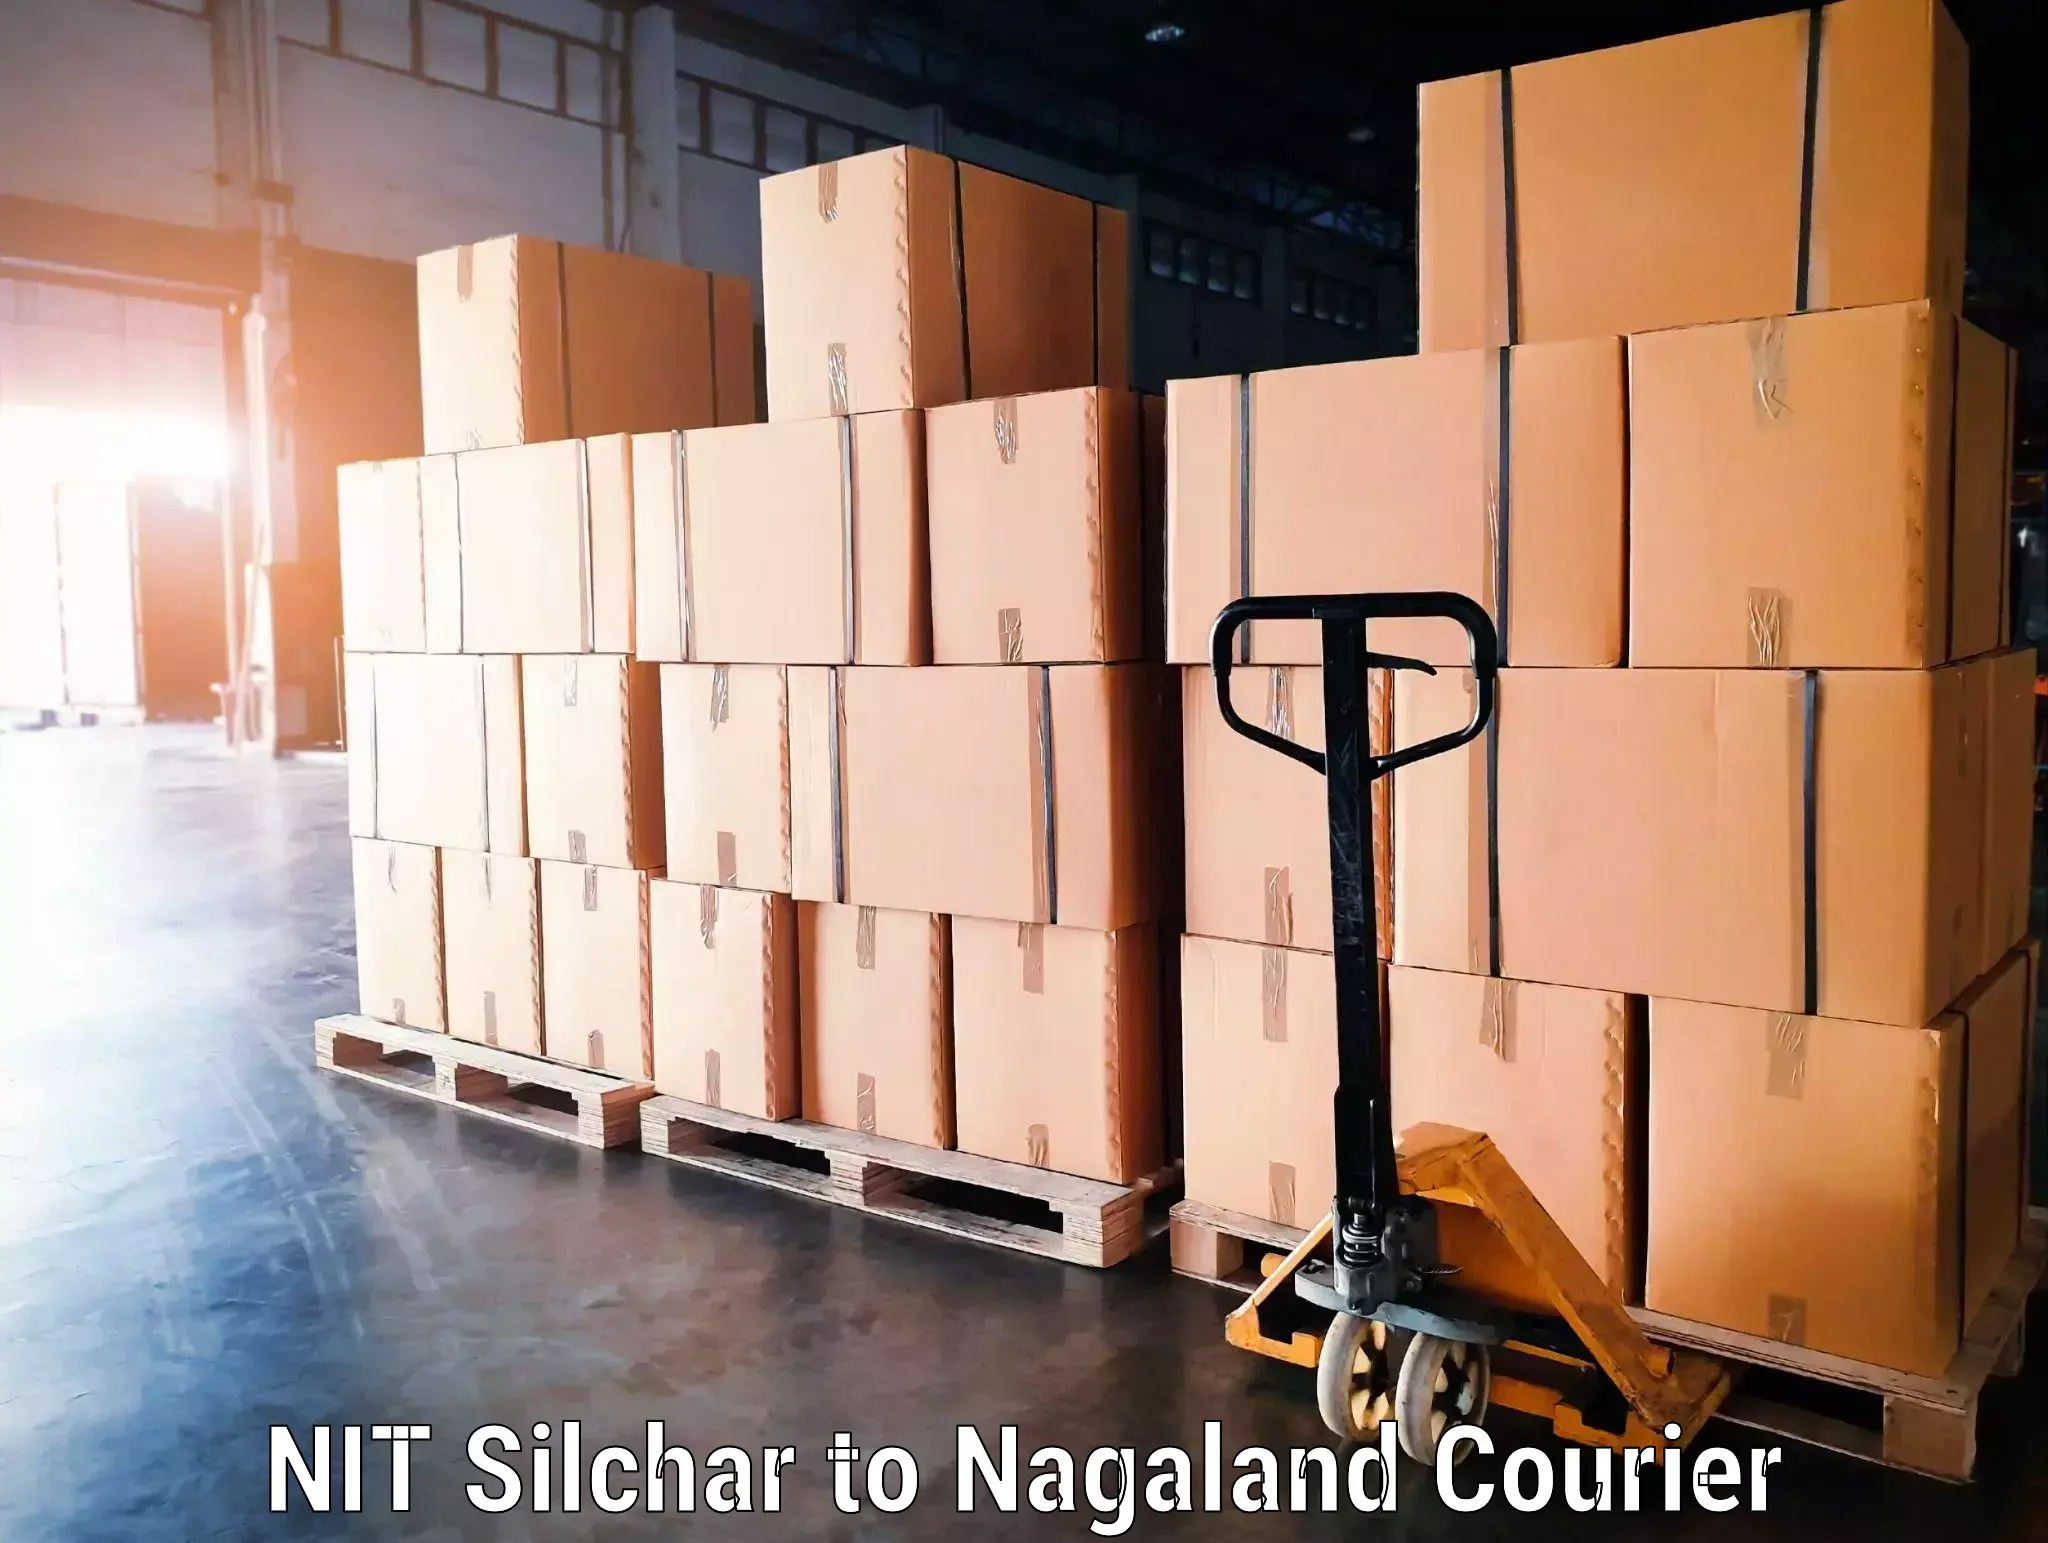 Instant baggage transport quote NIT Silchar to Dimapur